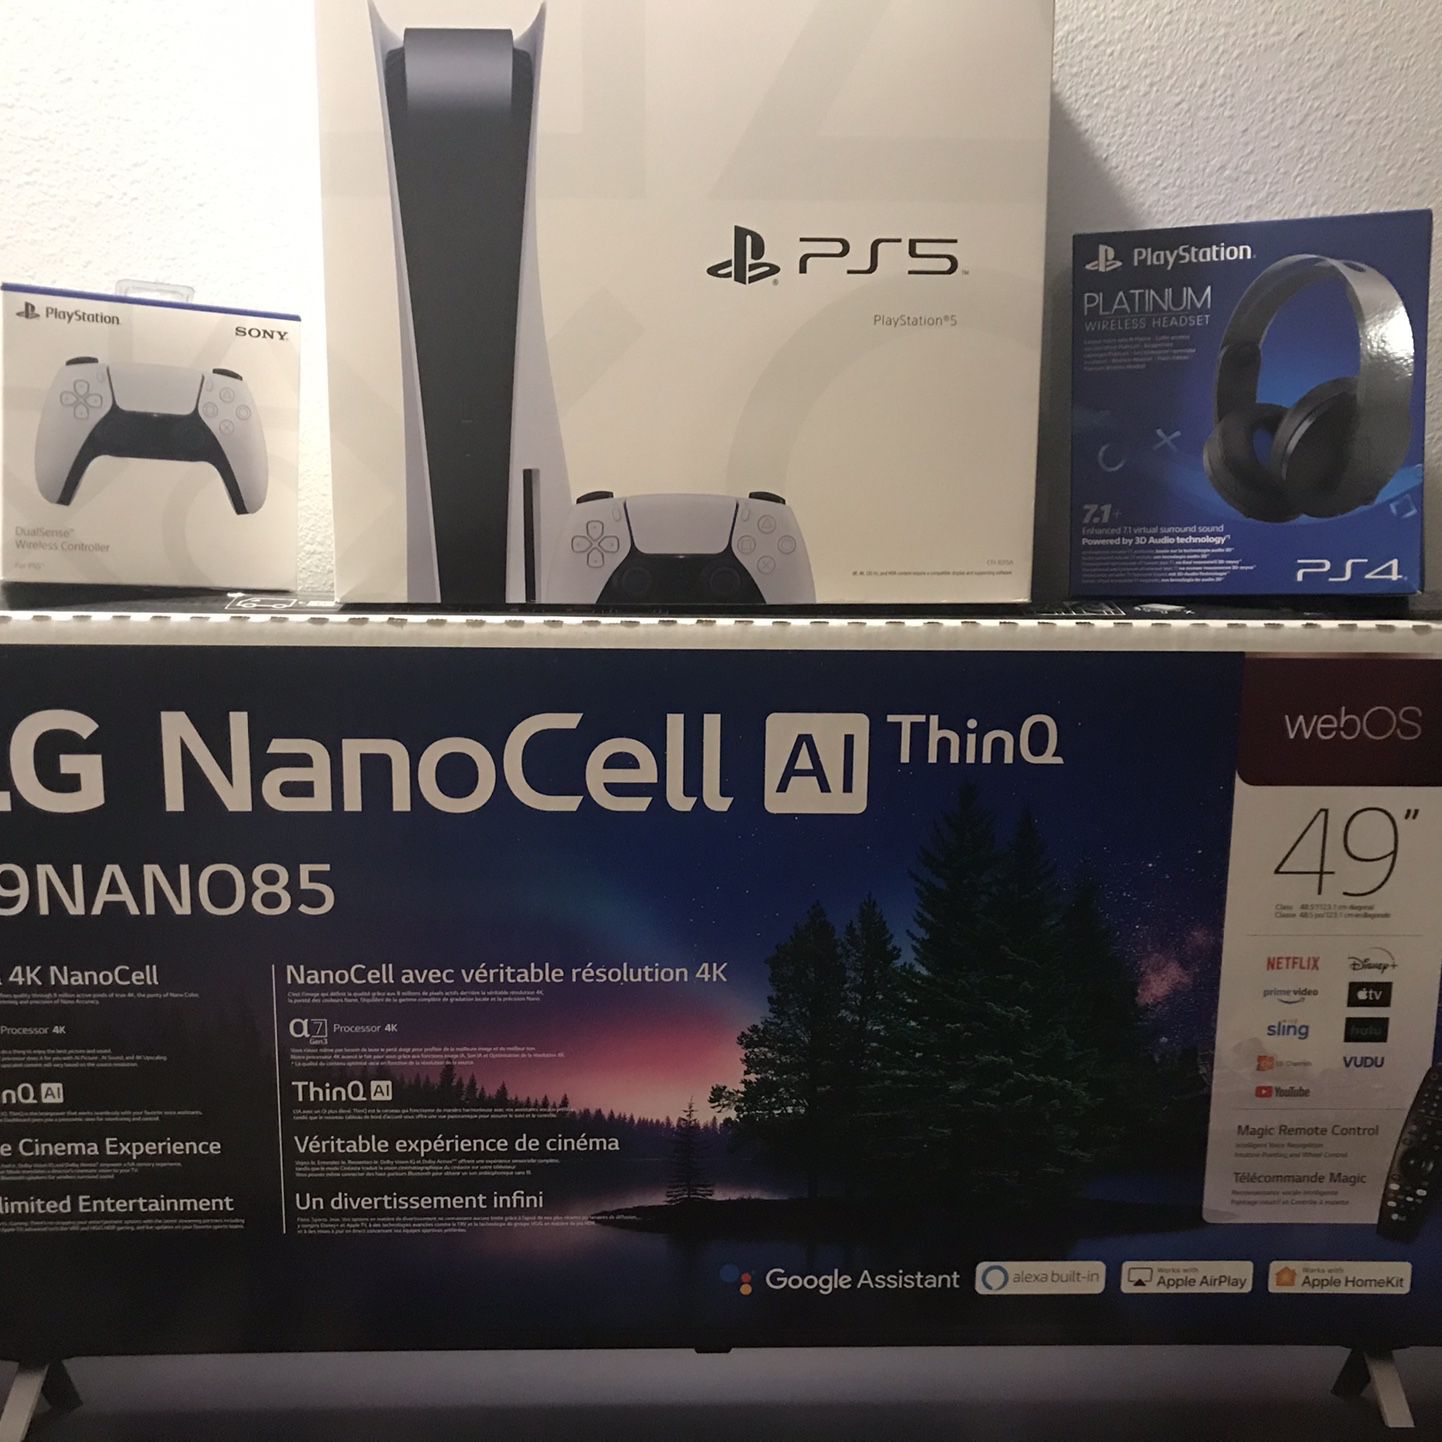 Brand New Playstation 5 with the LG49 2.1 HDMI NanoCell Real 4K. Platinum Headset & extra controller